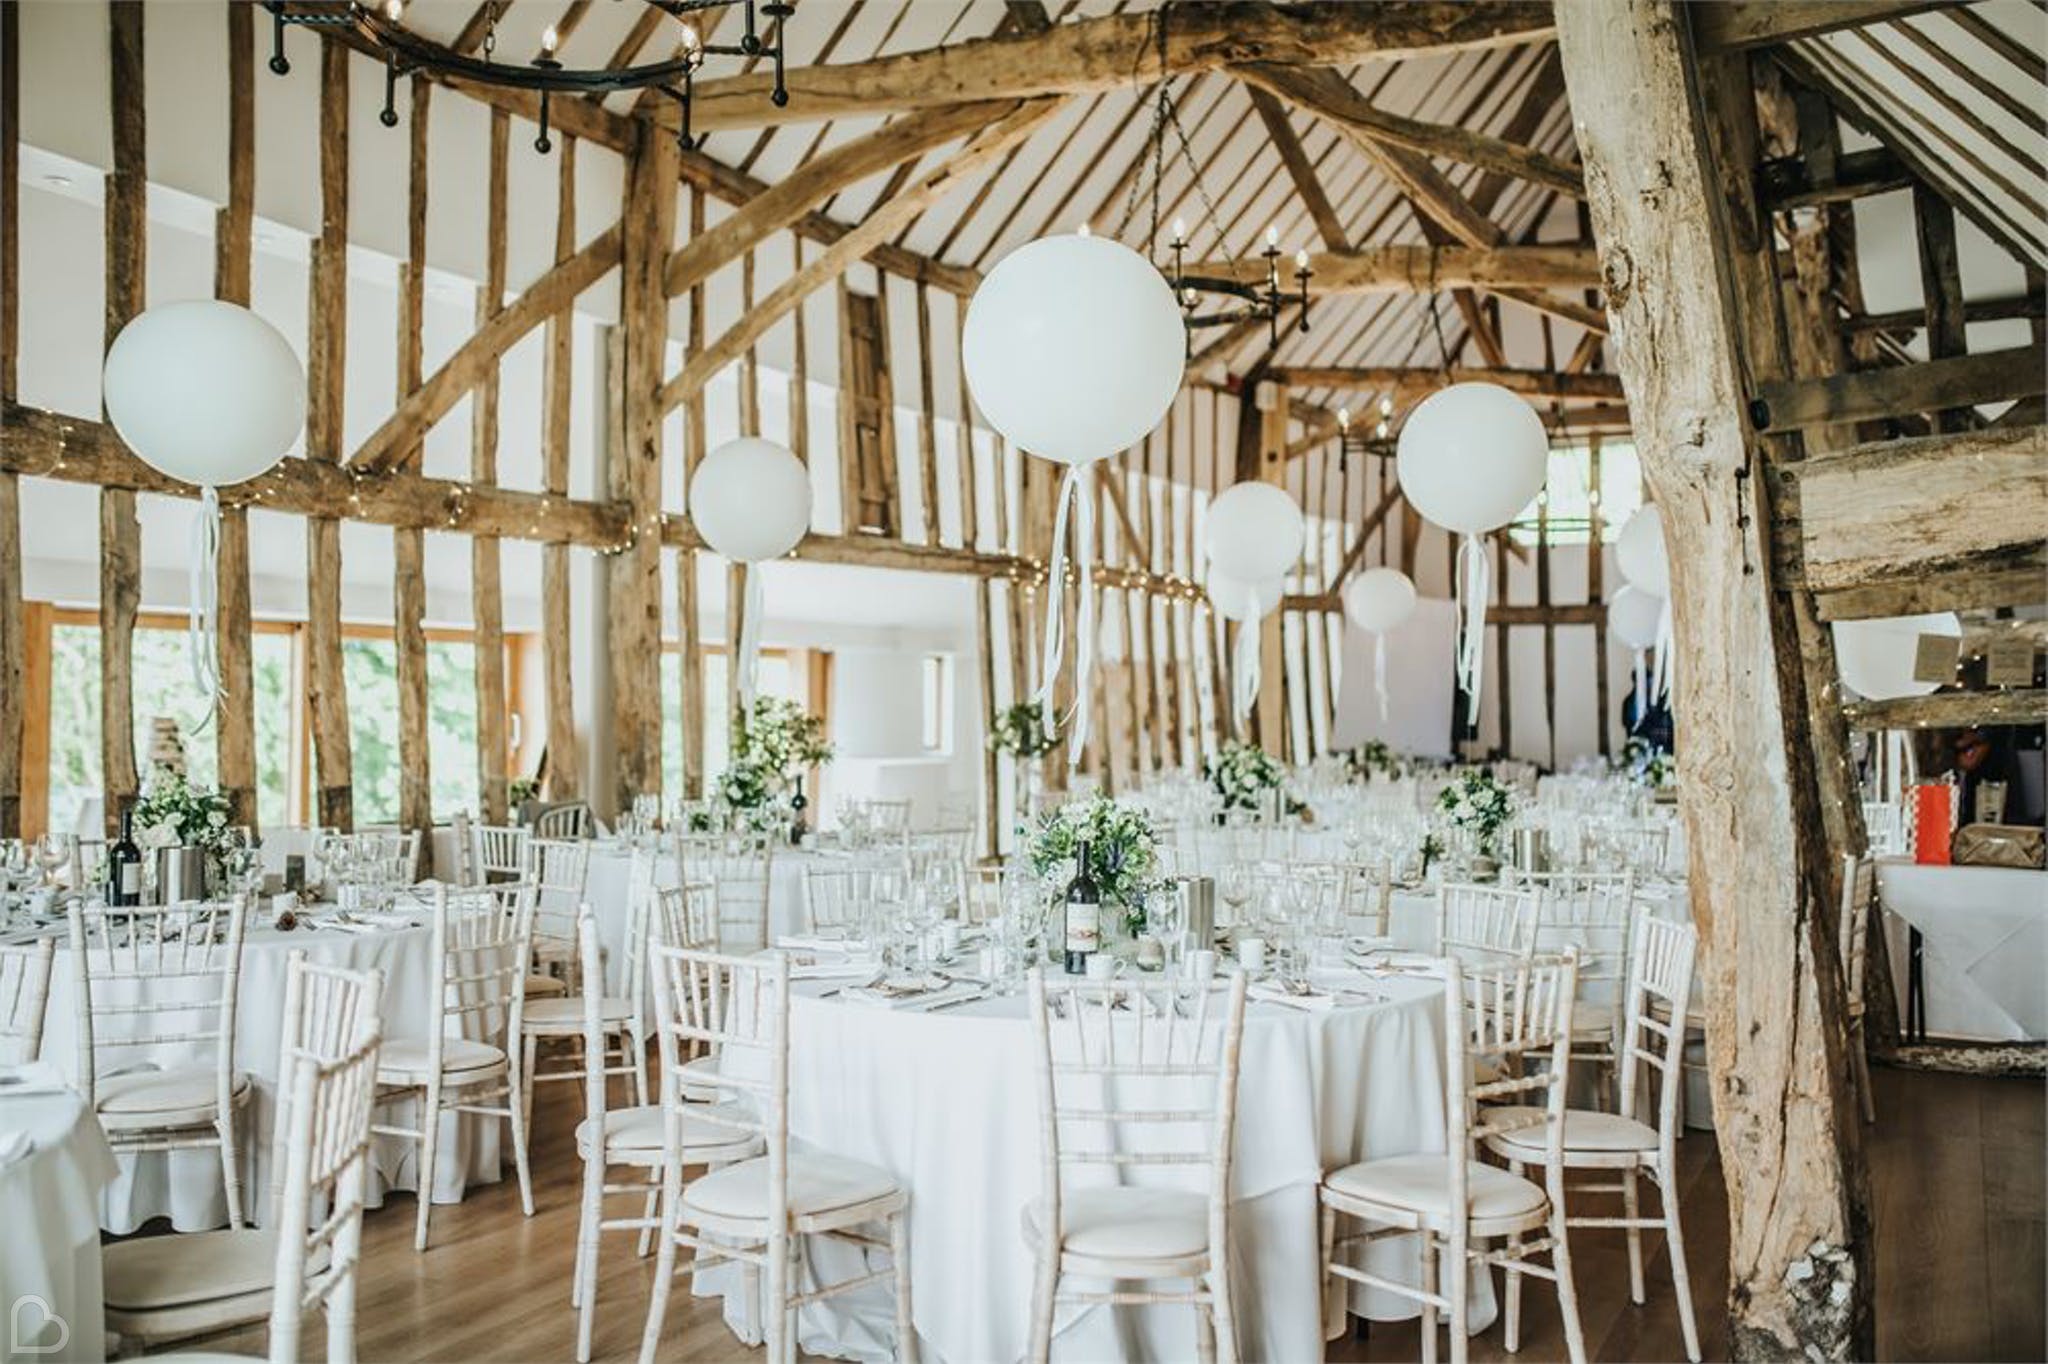 colville hall decorated with white circular lamps for a wedding, a barn venue in the uk